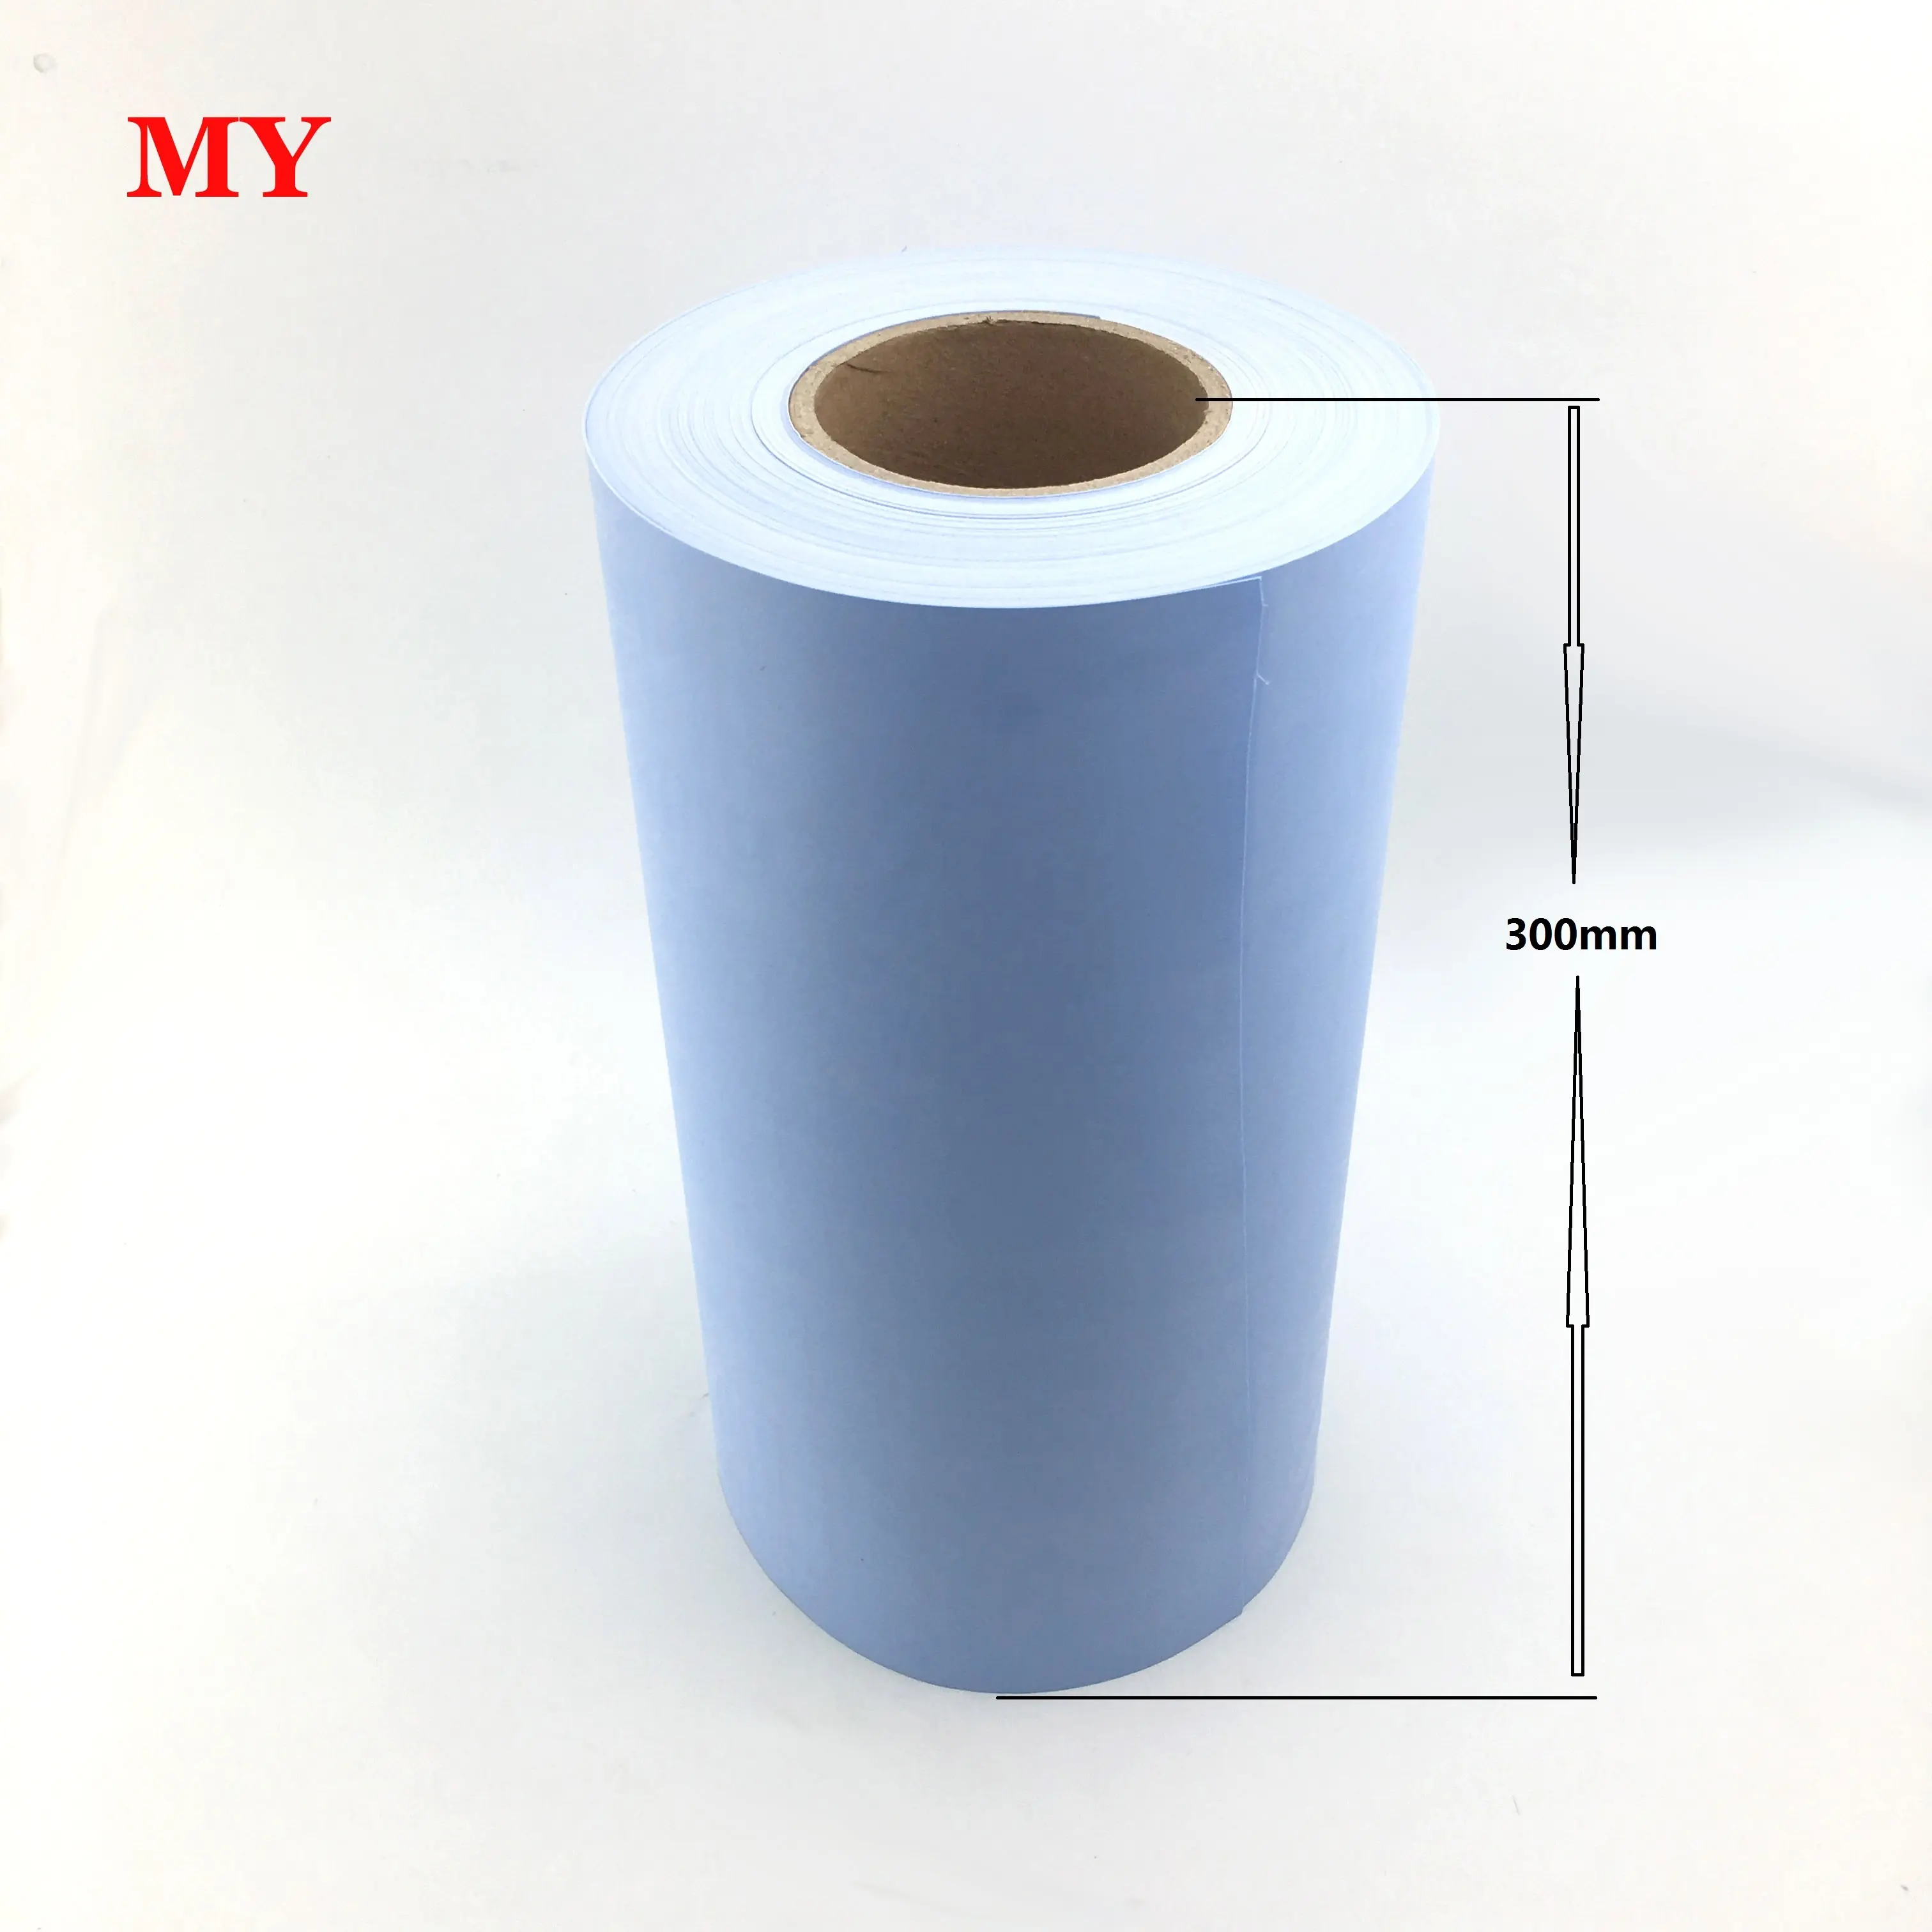 300mm fiberglass thermal conductive silicone cloth sil-pad insulation sheet